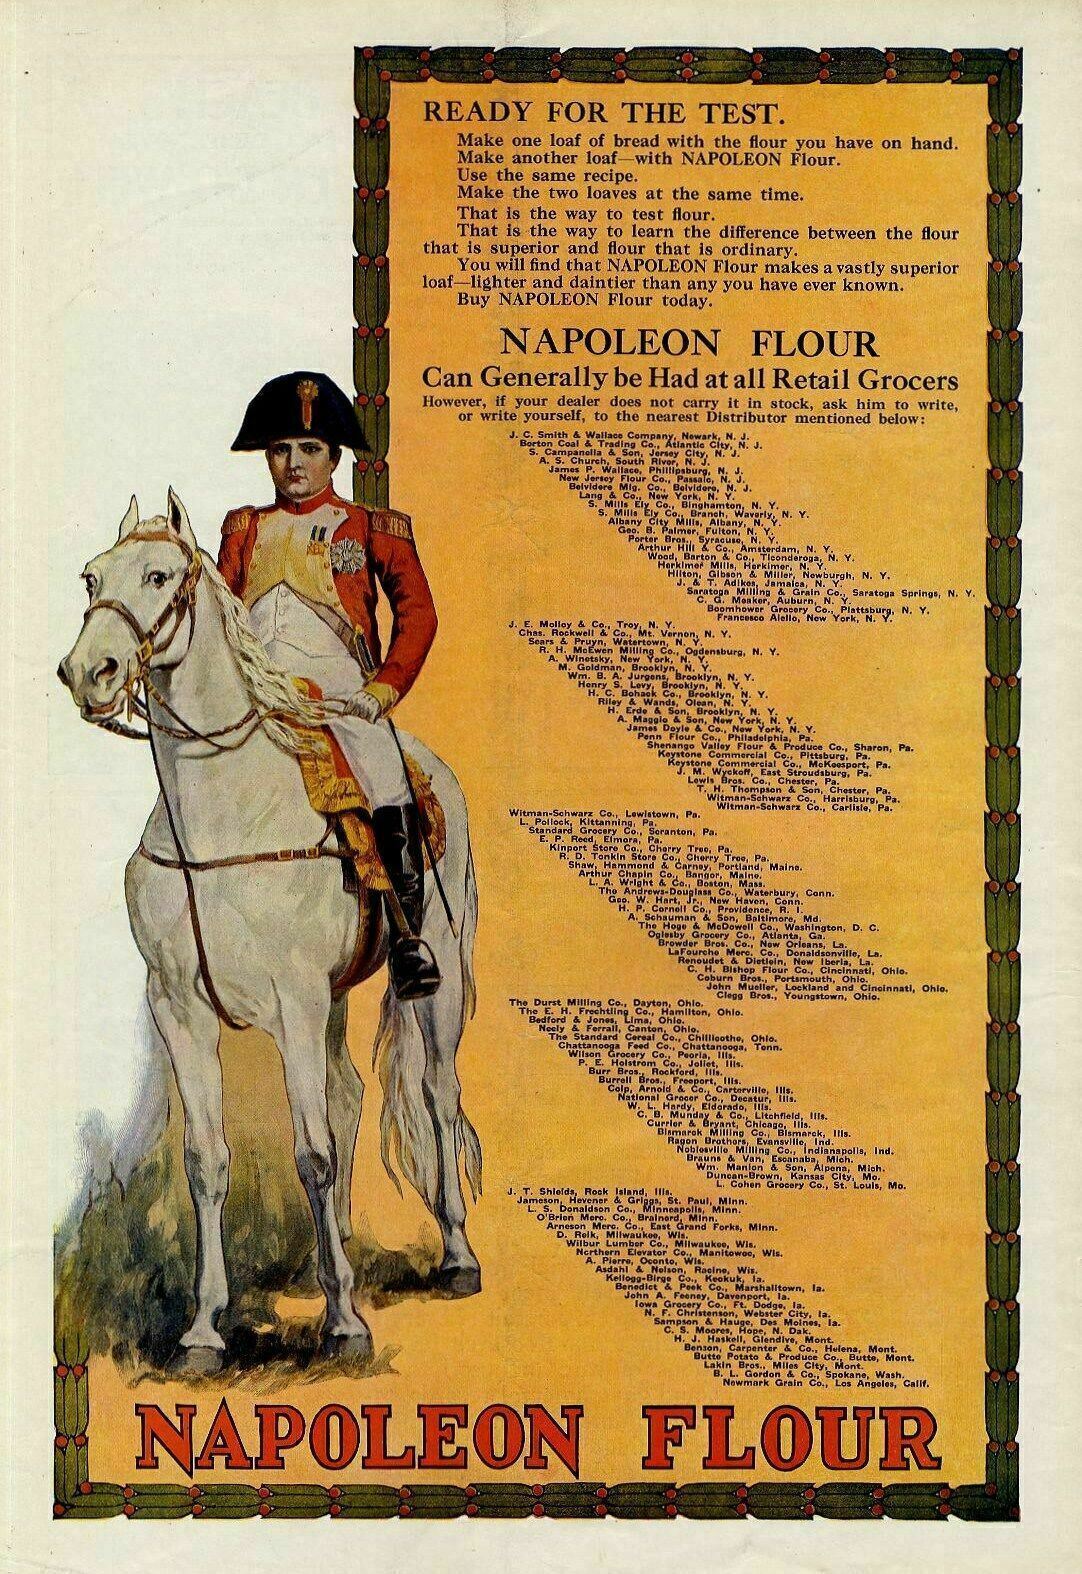 NAPOLEON FLOUR CAN GENERALLY BE HAD AT ALL RETAIL GROCERS NAPOLEON ON HORSEBACK